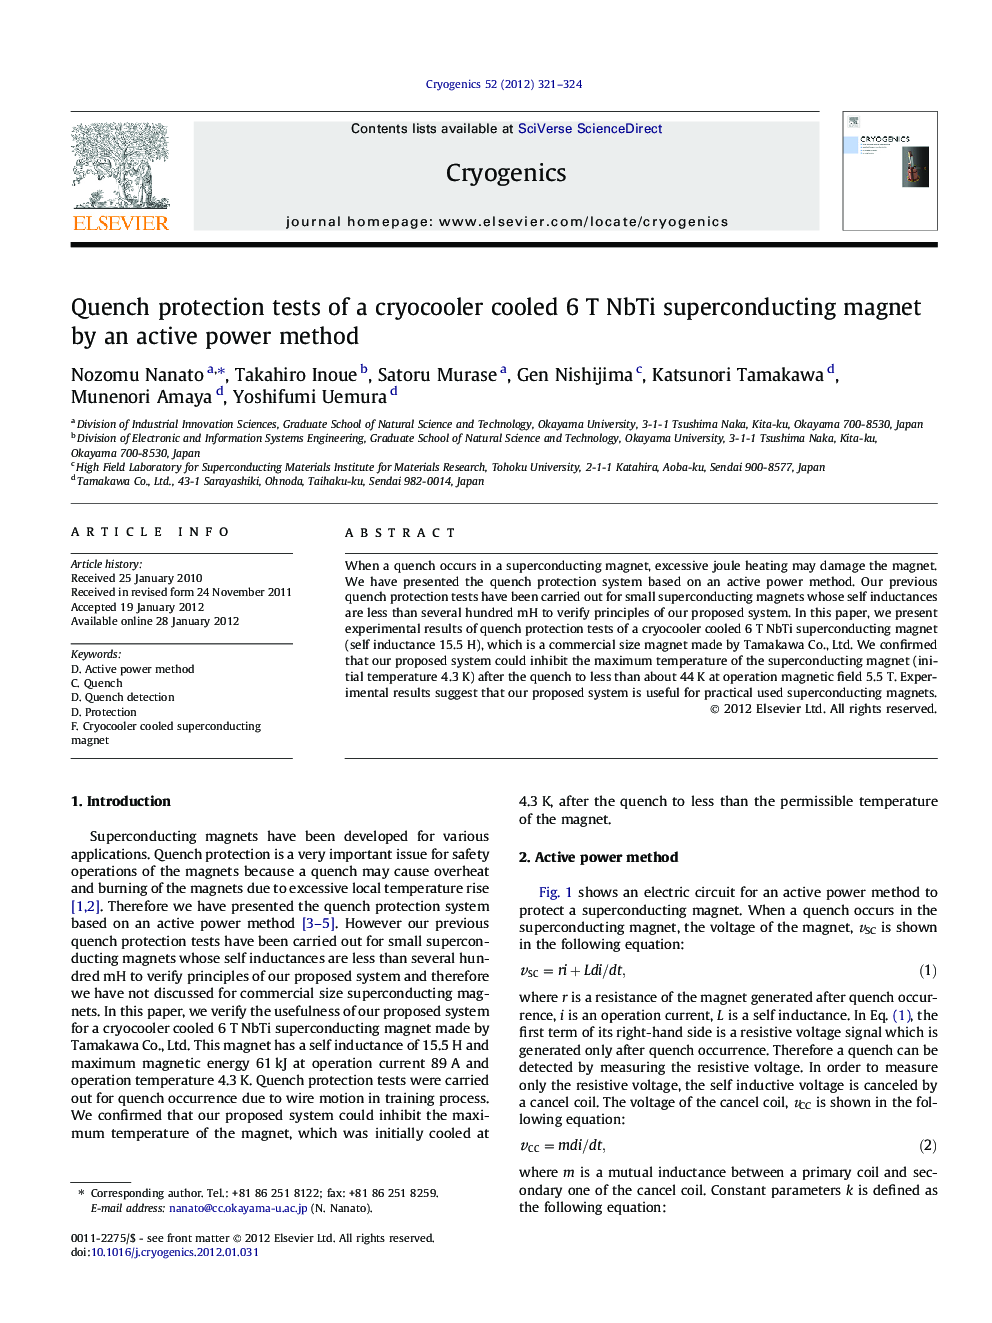 Quench protection tests of a cryocooler cooled 6 T NbTi superconducting magnet by an active power method